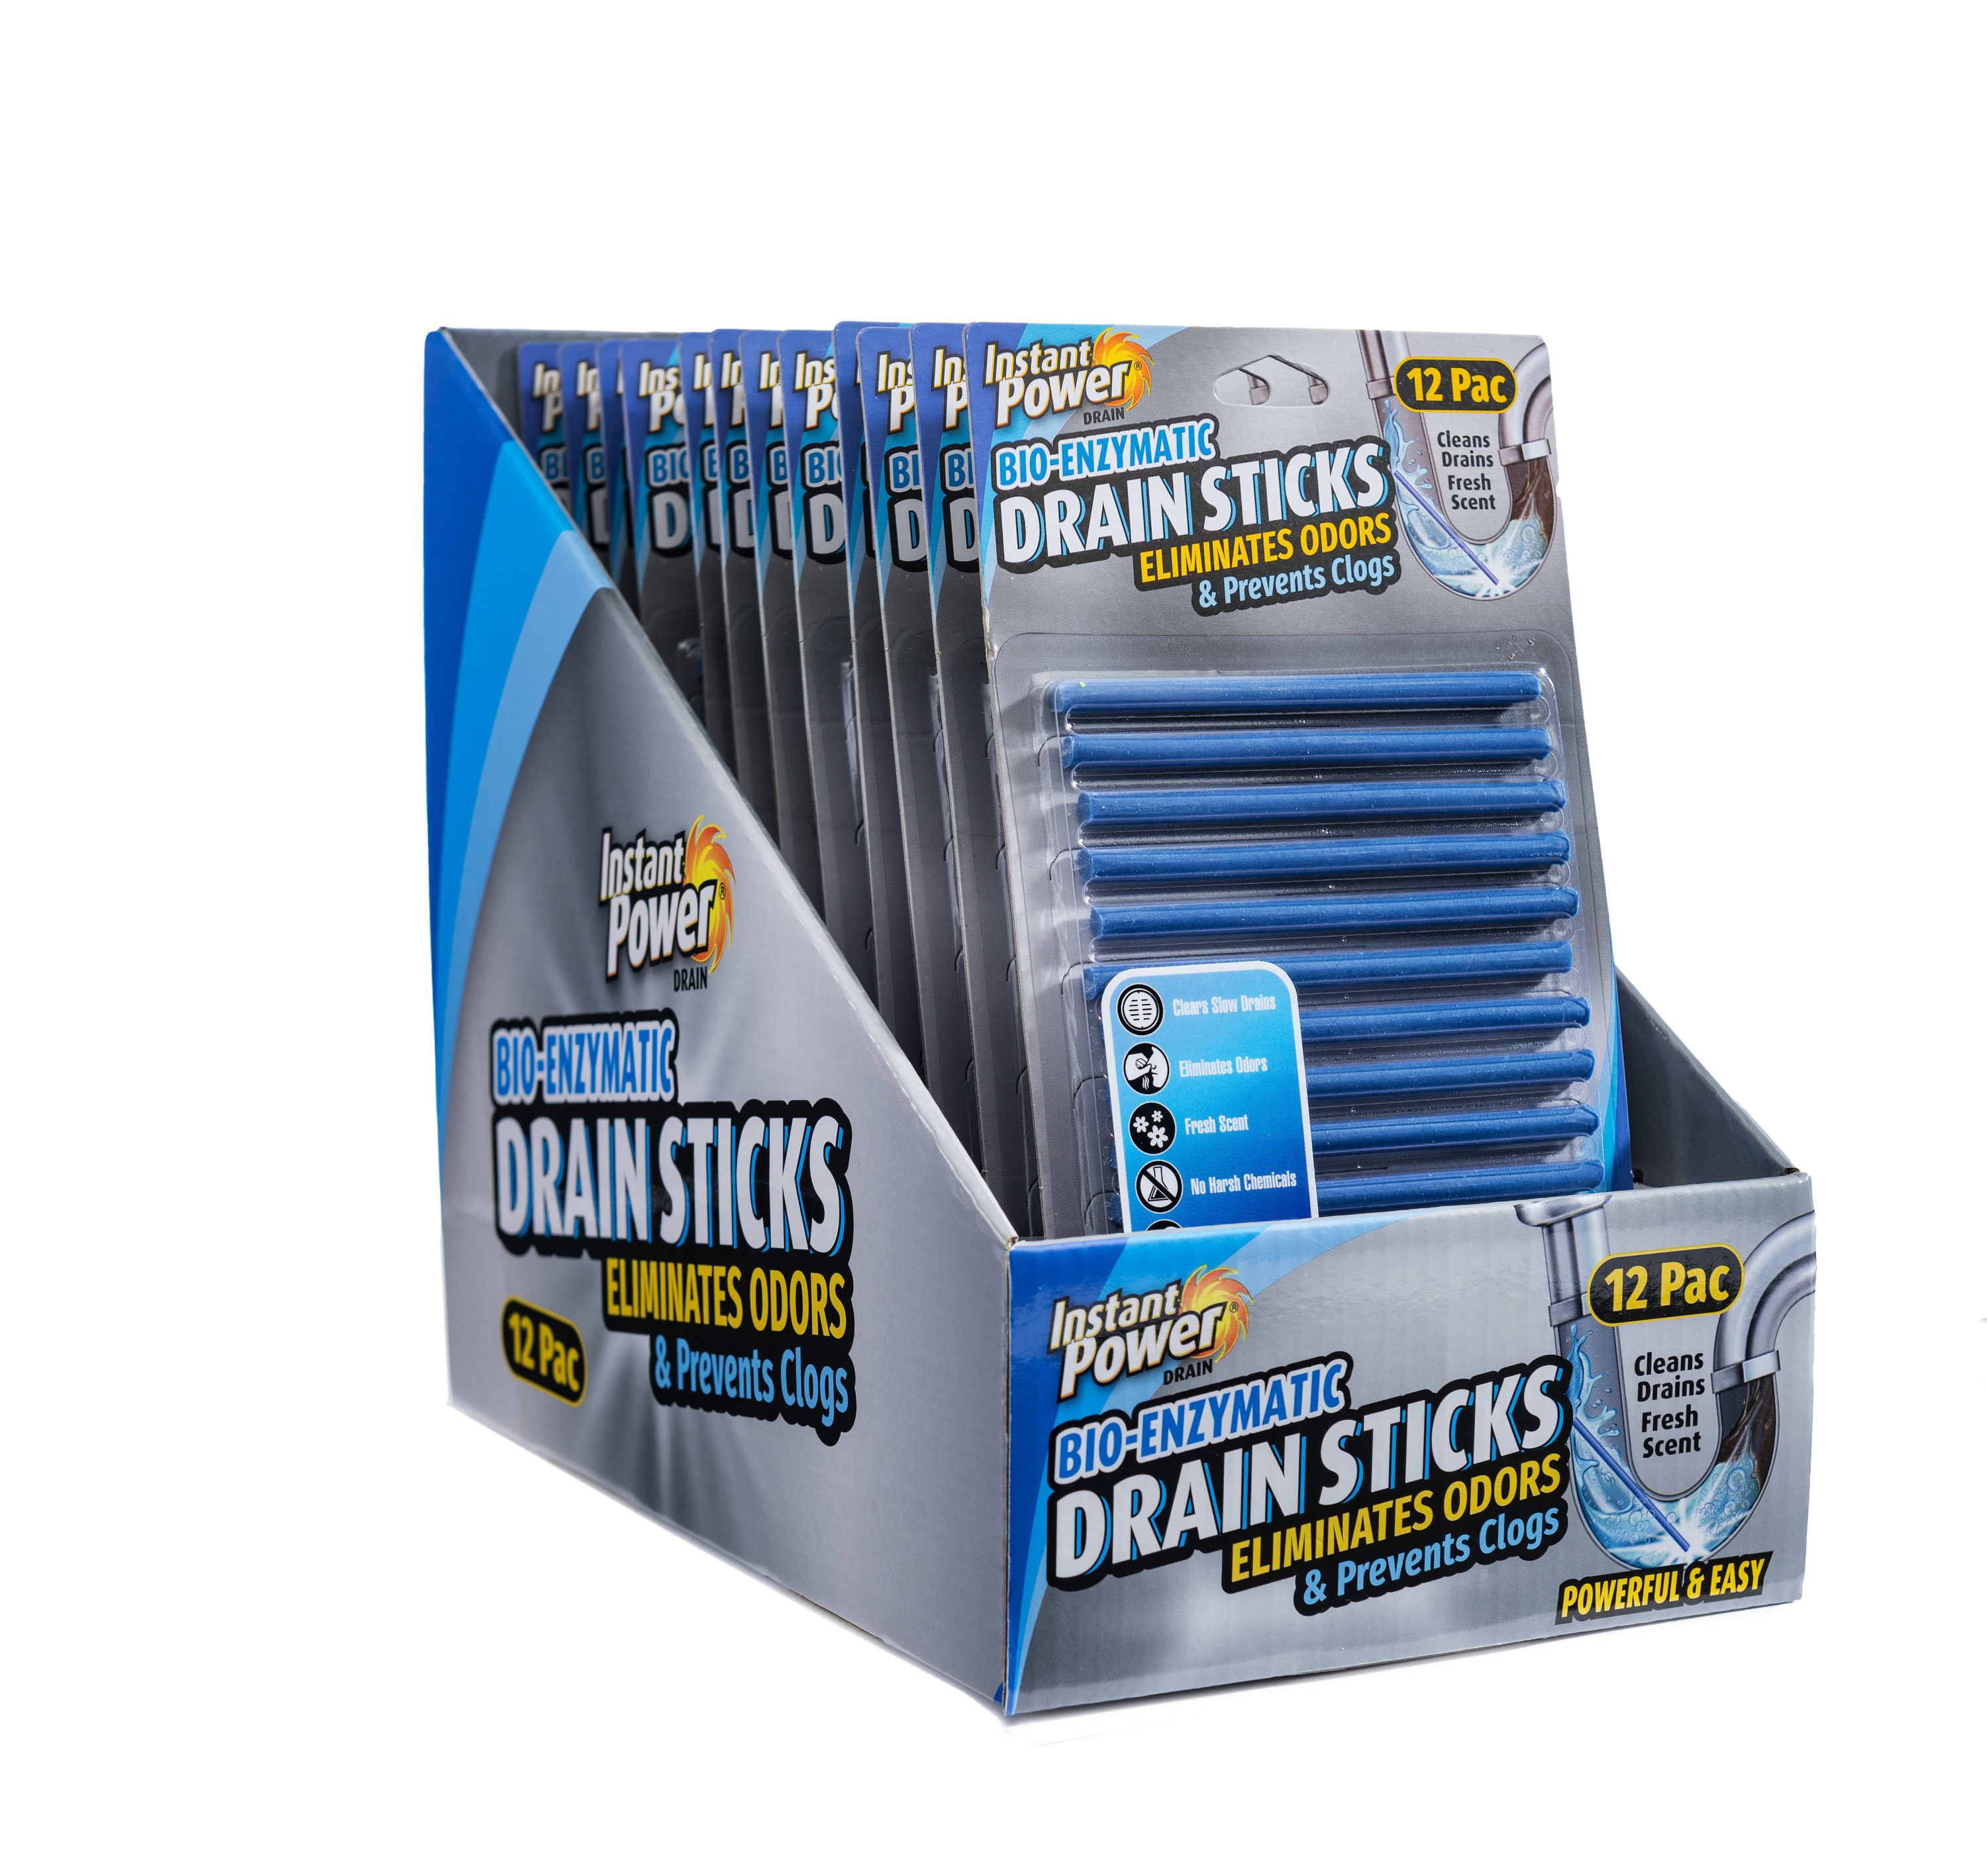 Ldr Industries 21-1/2 in. Drain Cling Stick, Easy-to-Clean